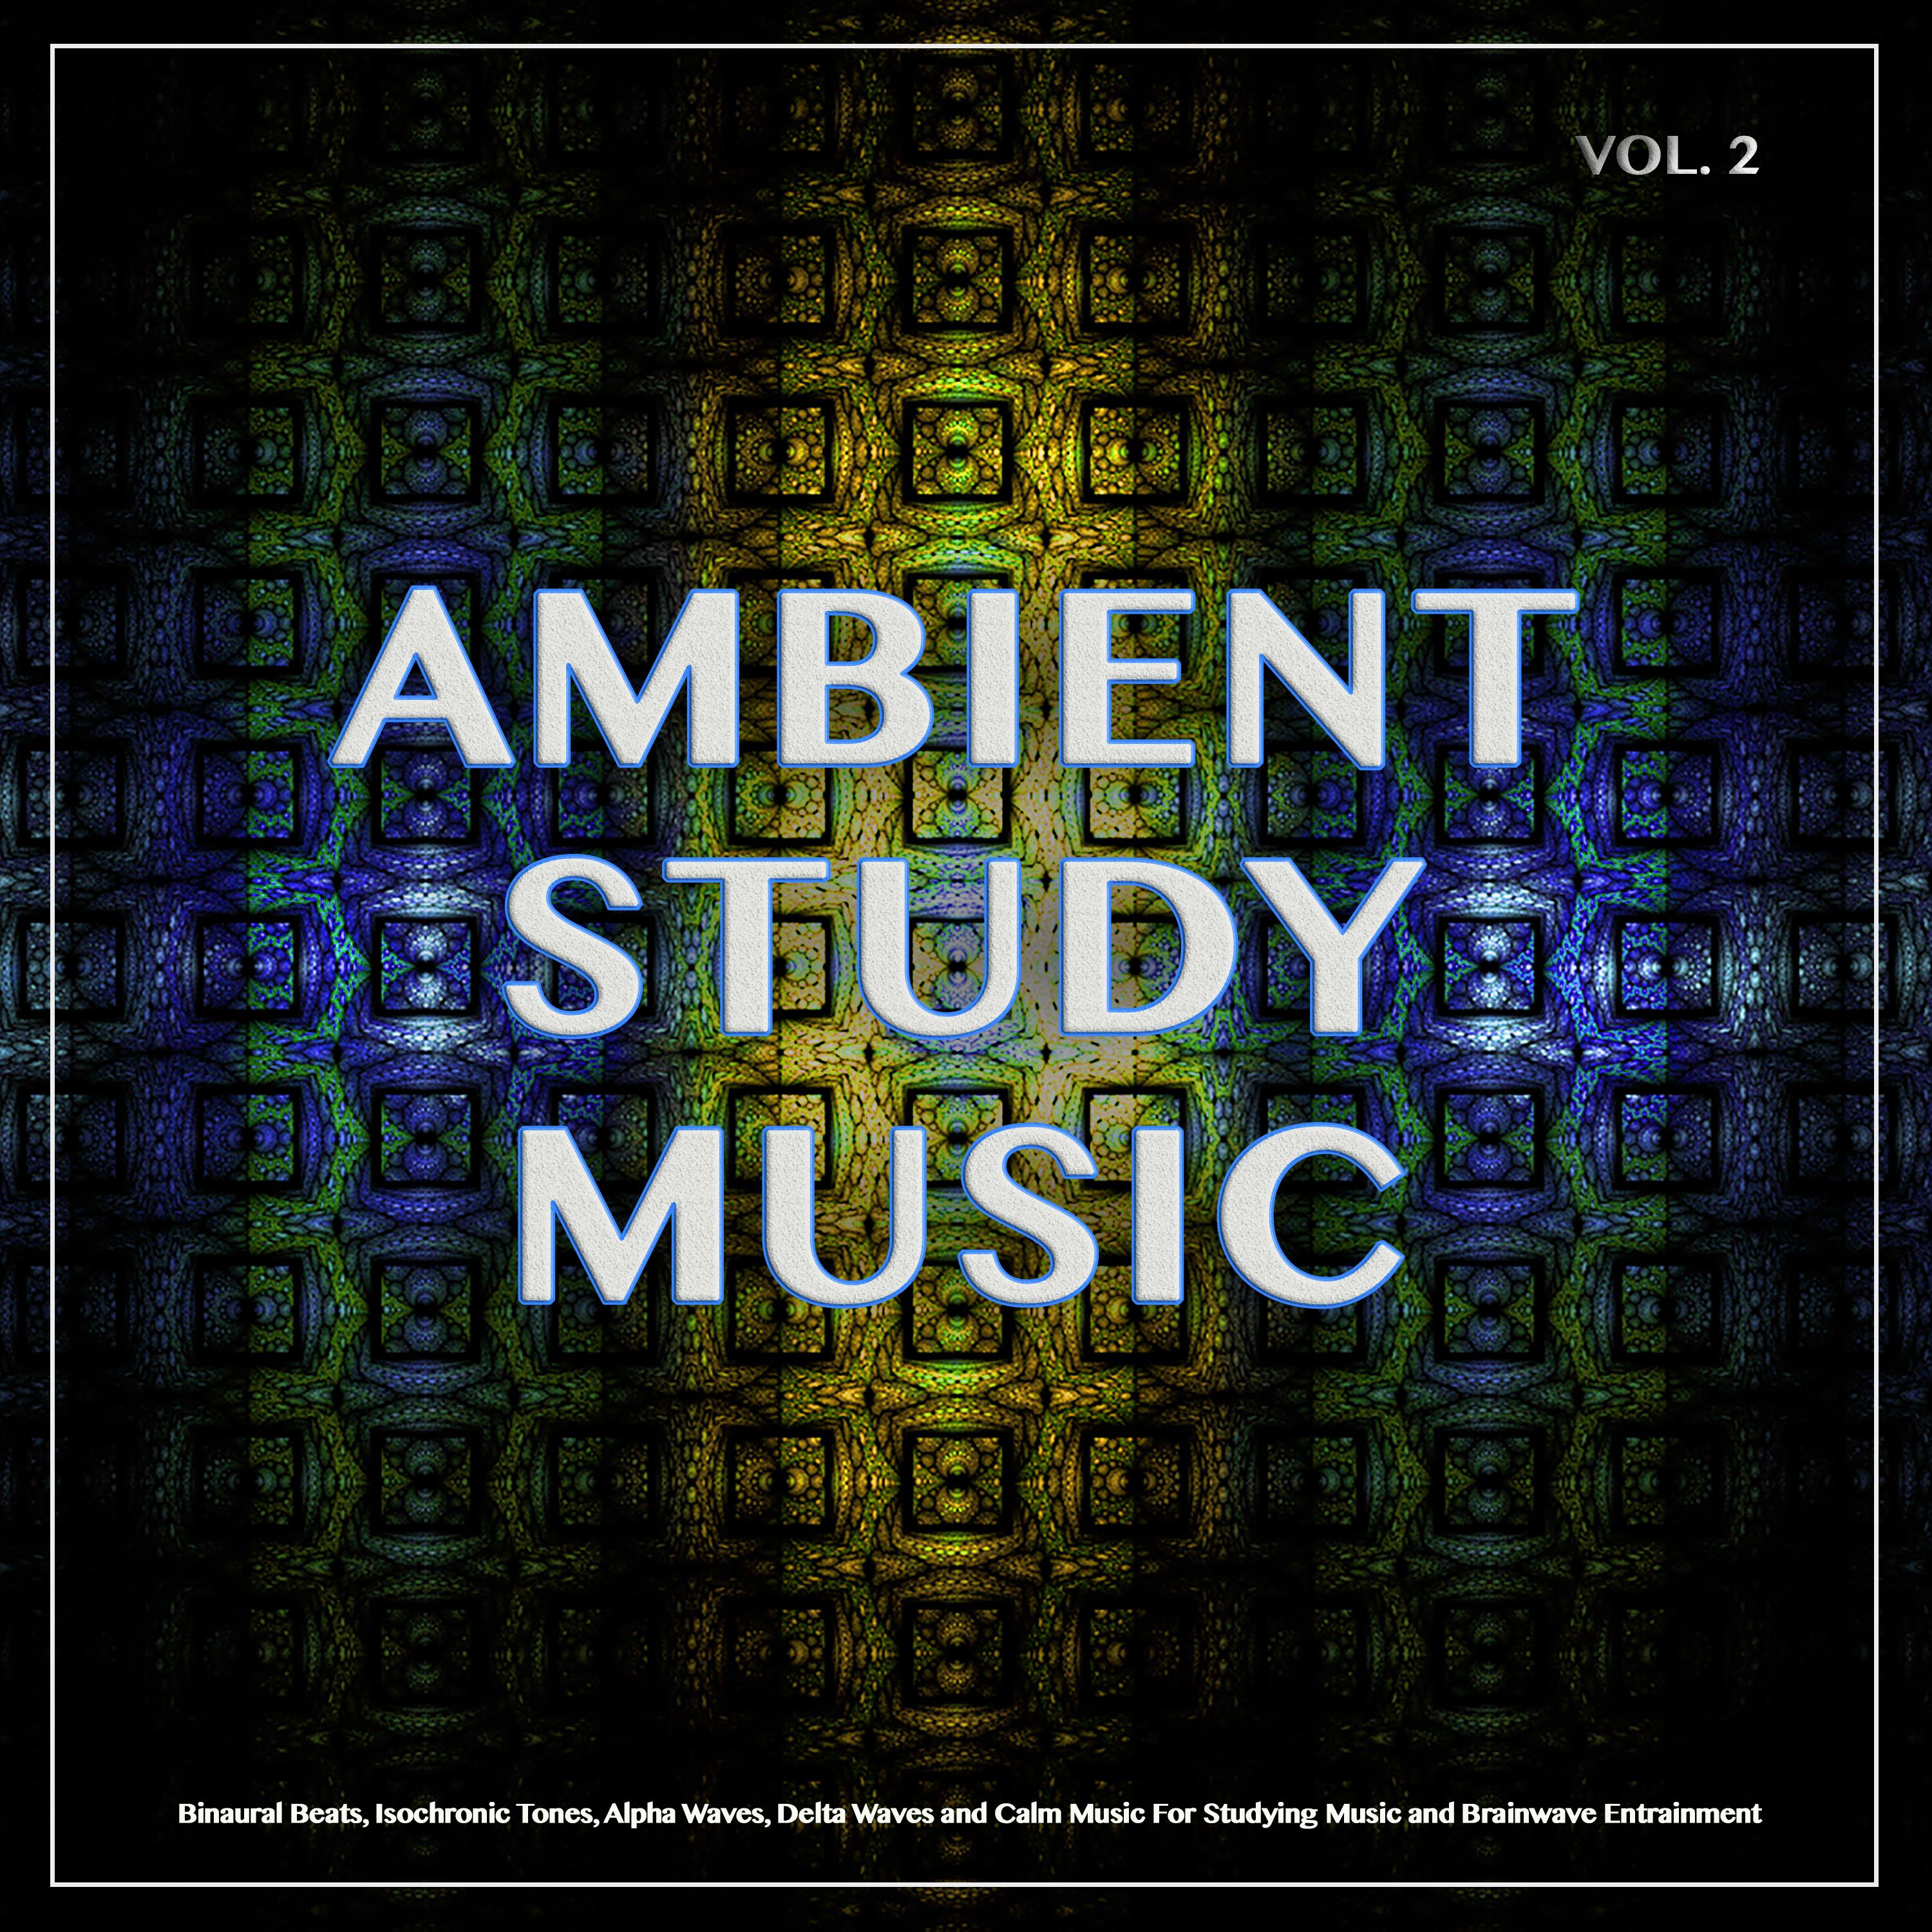 Ambient Study Music: Binaural Beats, Isochronic Tones, Alpha Waves, Delta Waves and Calm Music For Studying Music and Brainwave Entrainment, Vol. 2